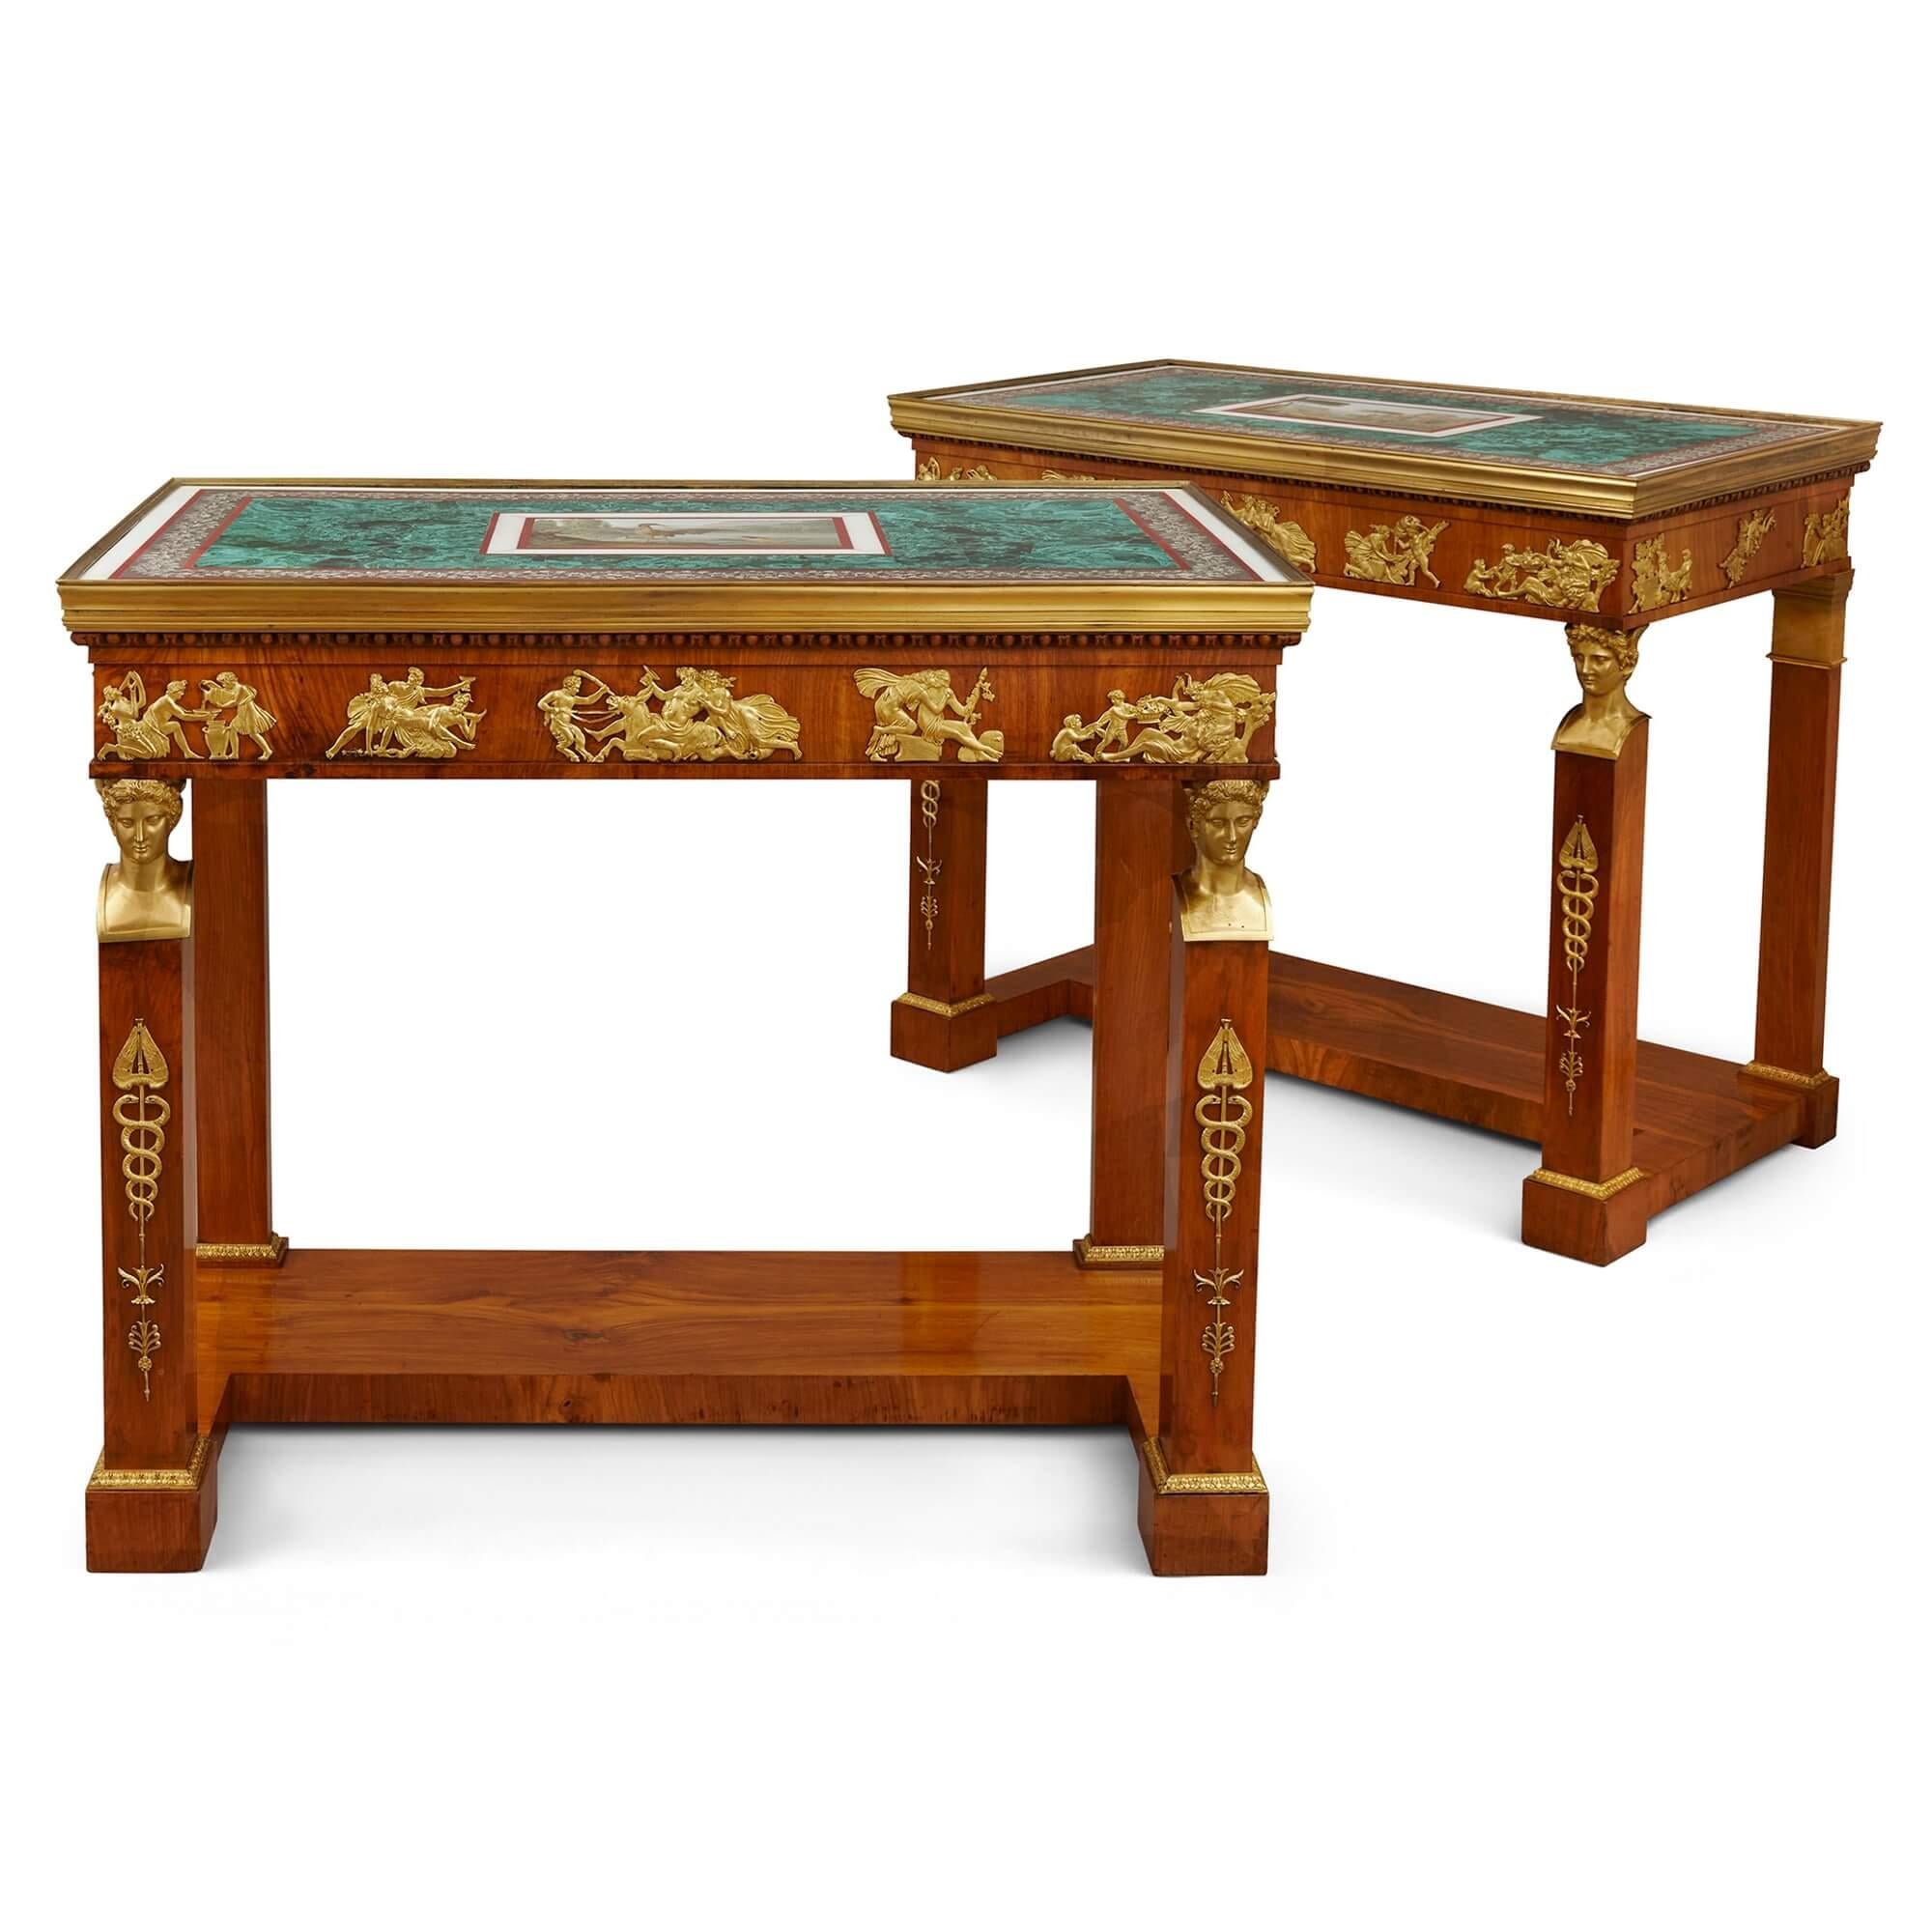 Empire Important and Very Rare Pair of Micromosaic, Malachite and Walnut Console Tables For Sale